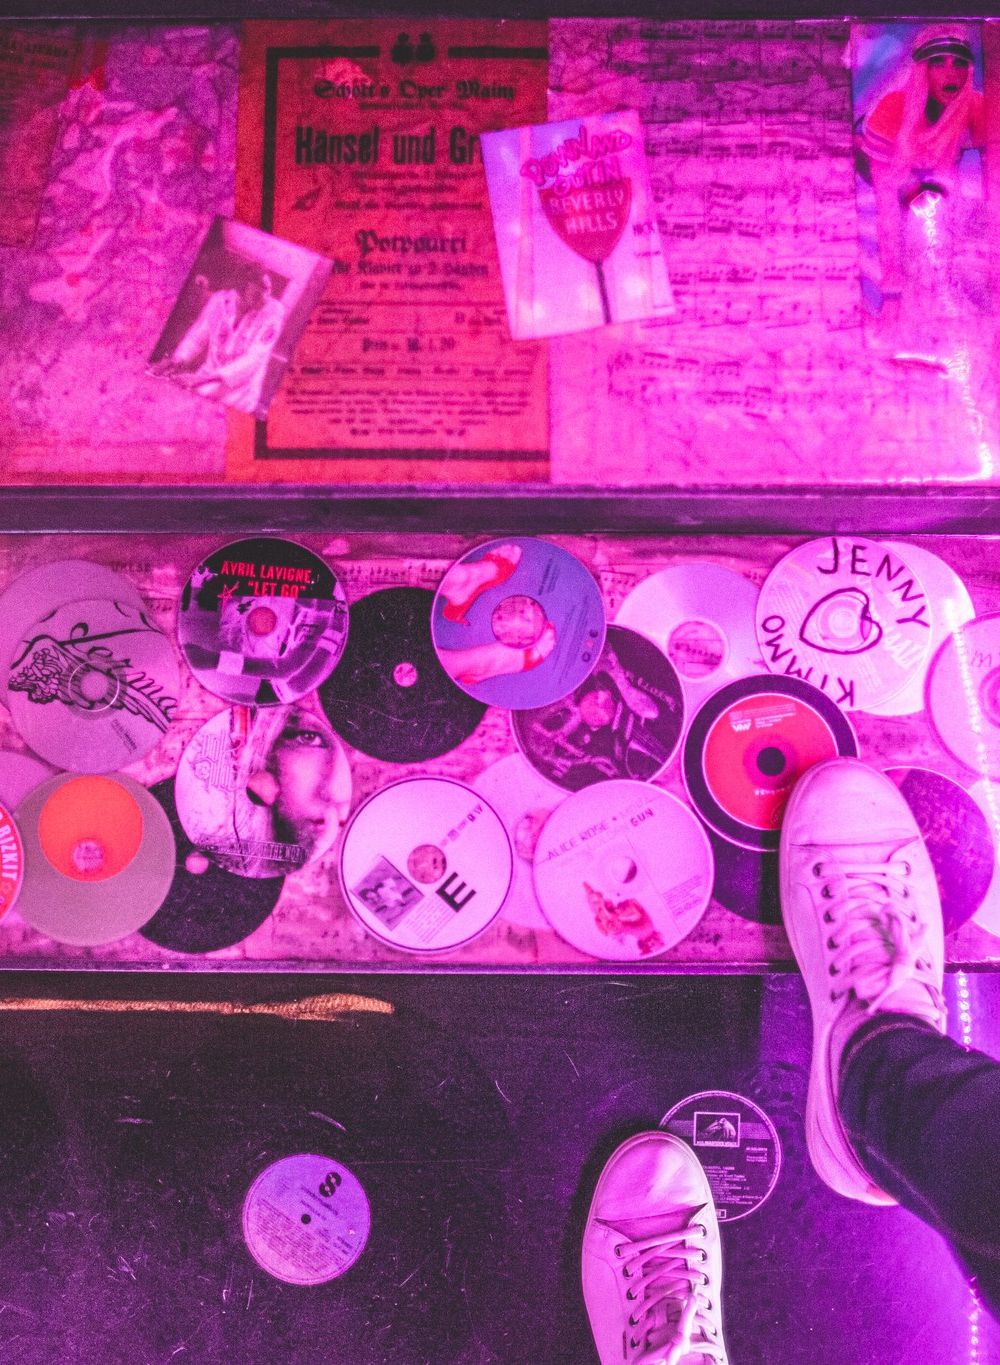 G livelab steps with cd records in purple light